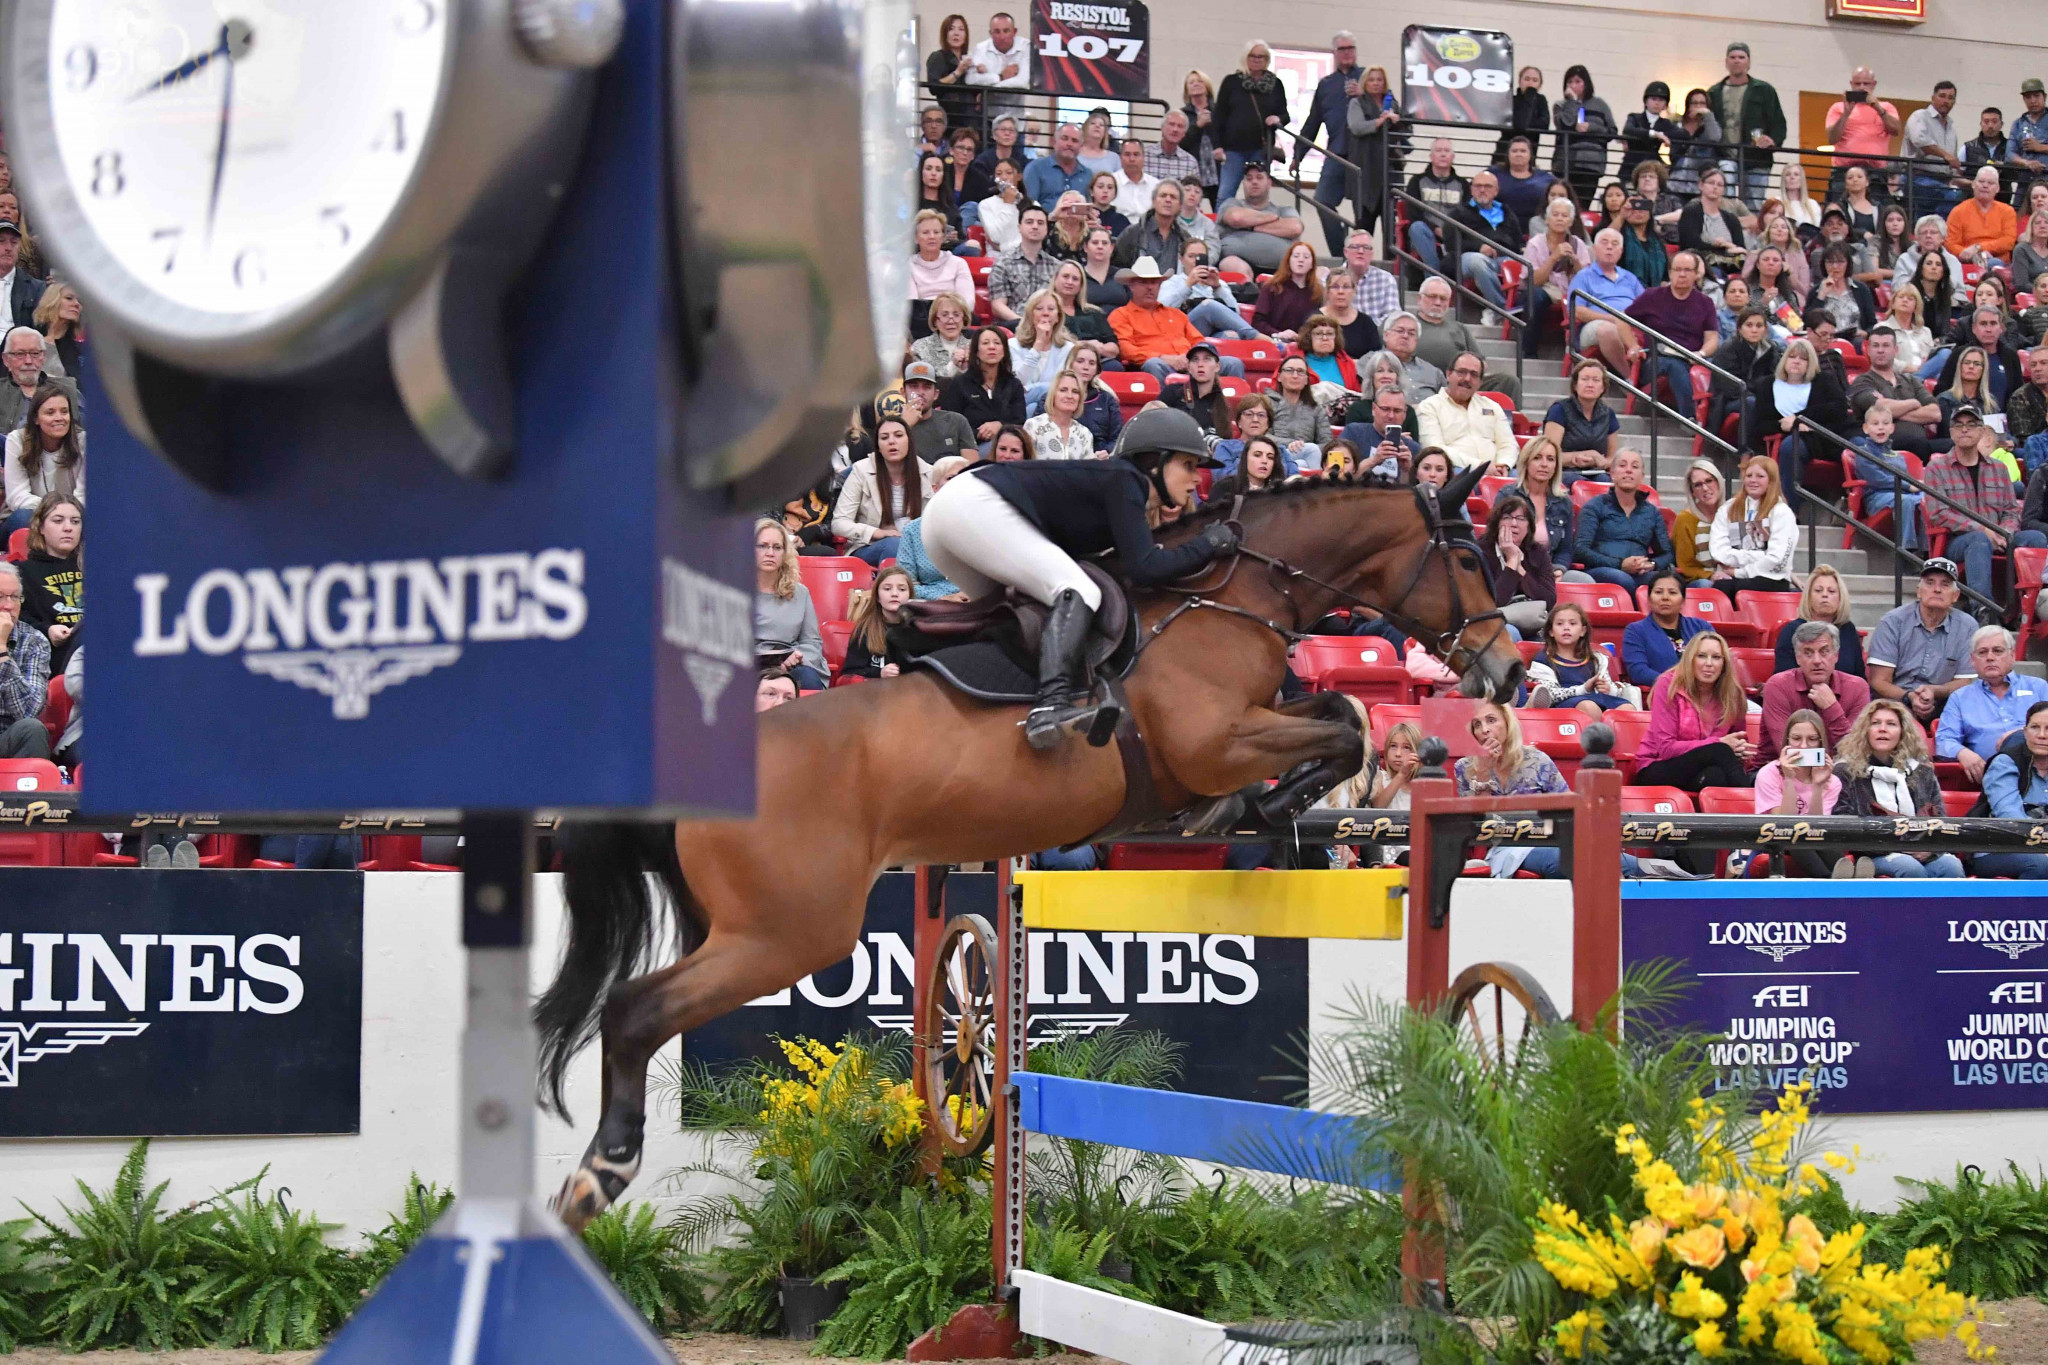 Sternlicht records second straight FEI Jumping World Cup win with Las Vegas victory